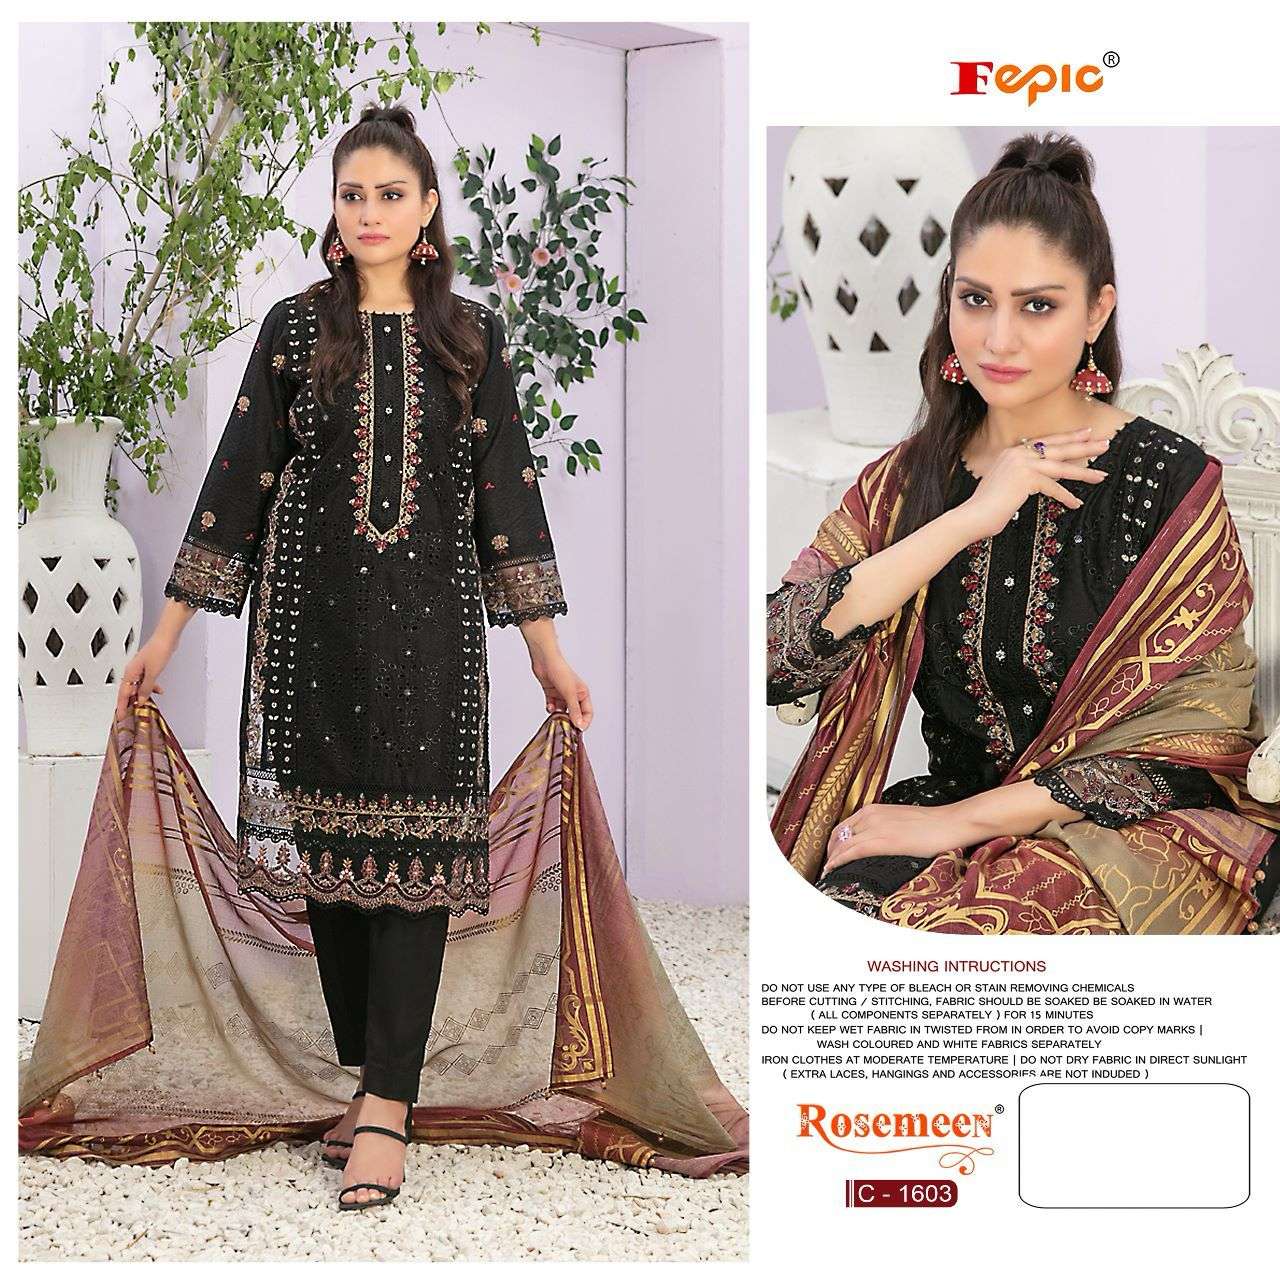 Fepic Rosemeen 1603 Organza With Embroidery work Pakistani s...